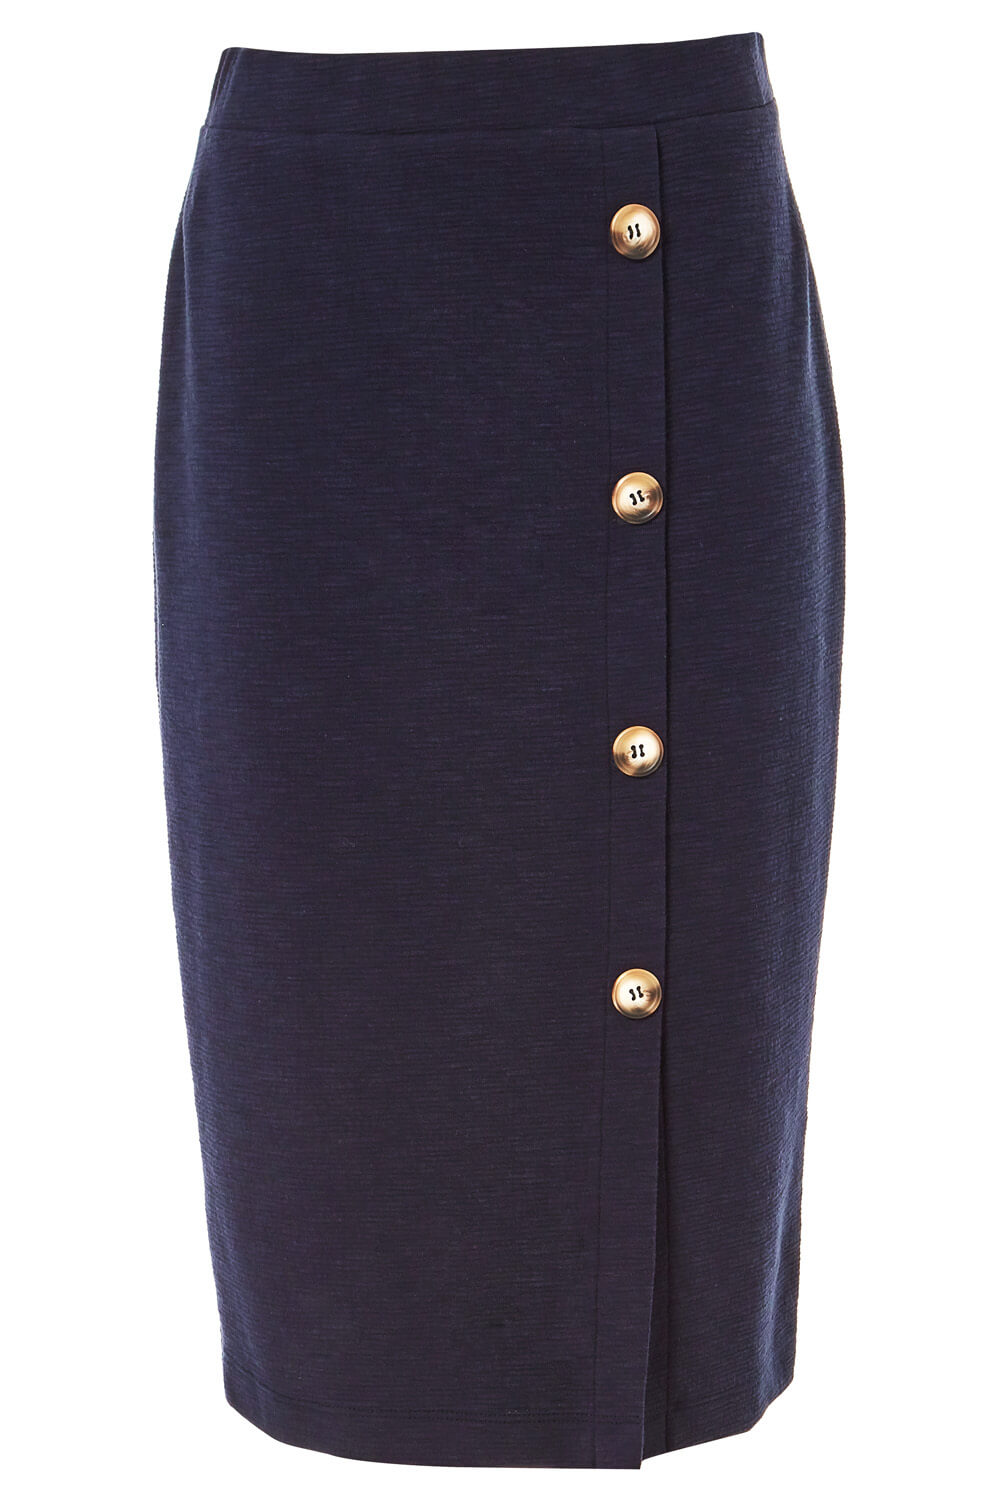 Navy  Button Detail Knitted Pencil Skirt, Image 5 of 5